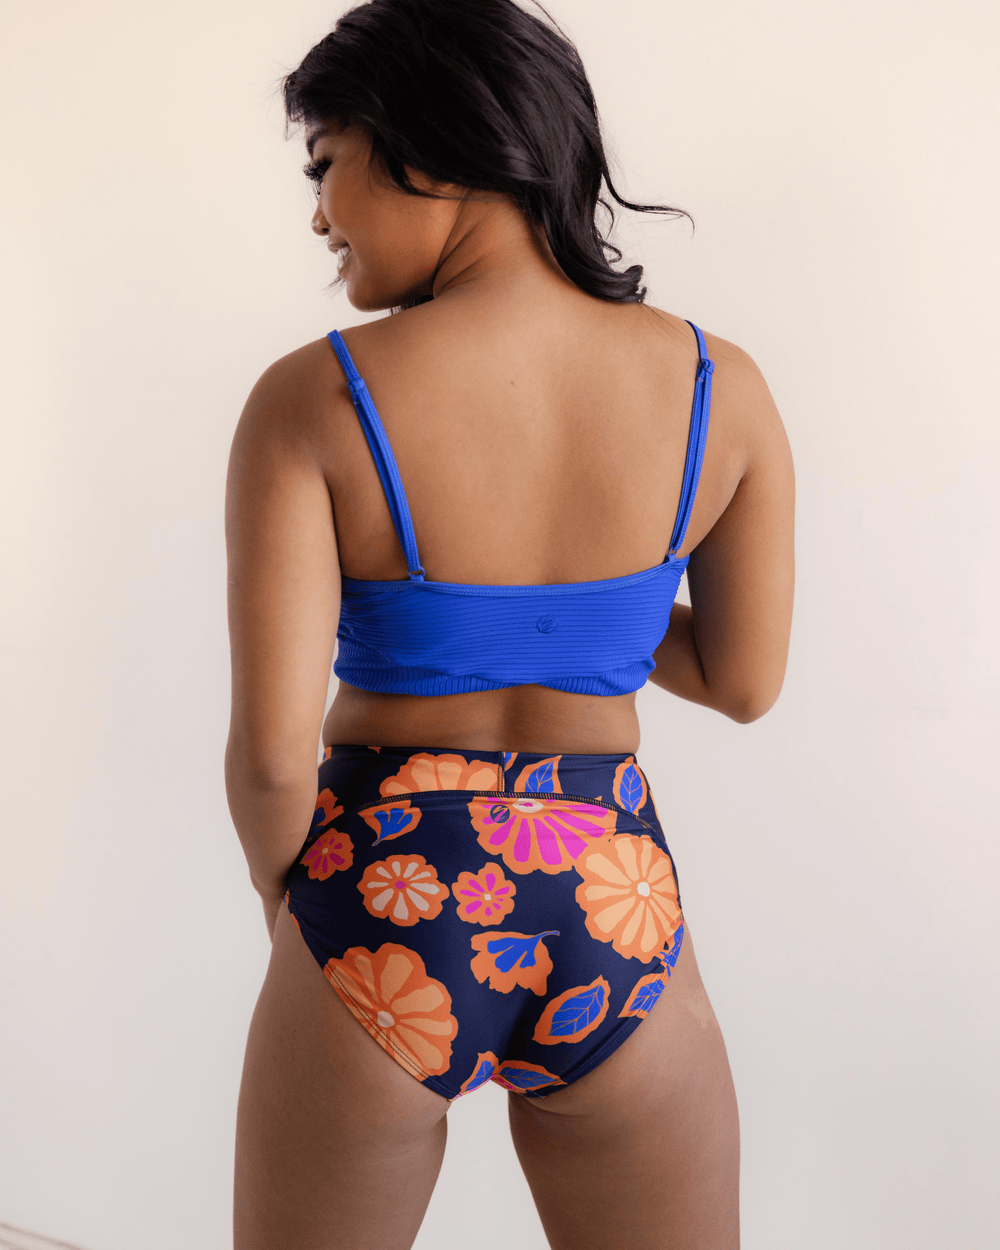 Back View studio picture showing the bold orange and pink floral swimsuit bottom